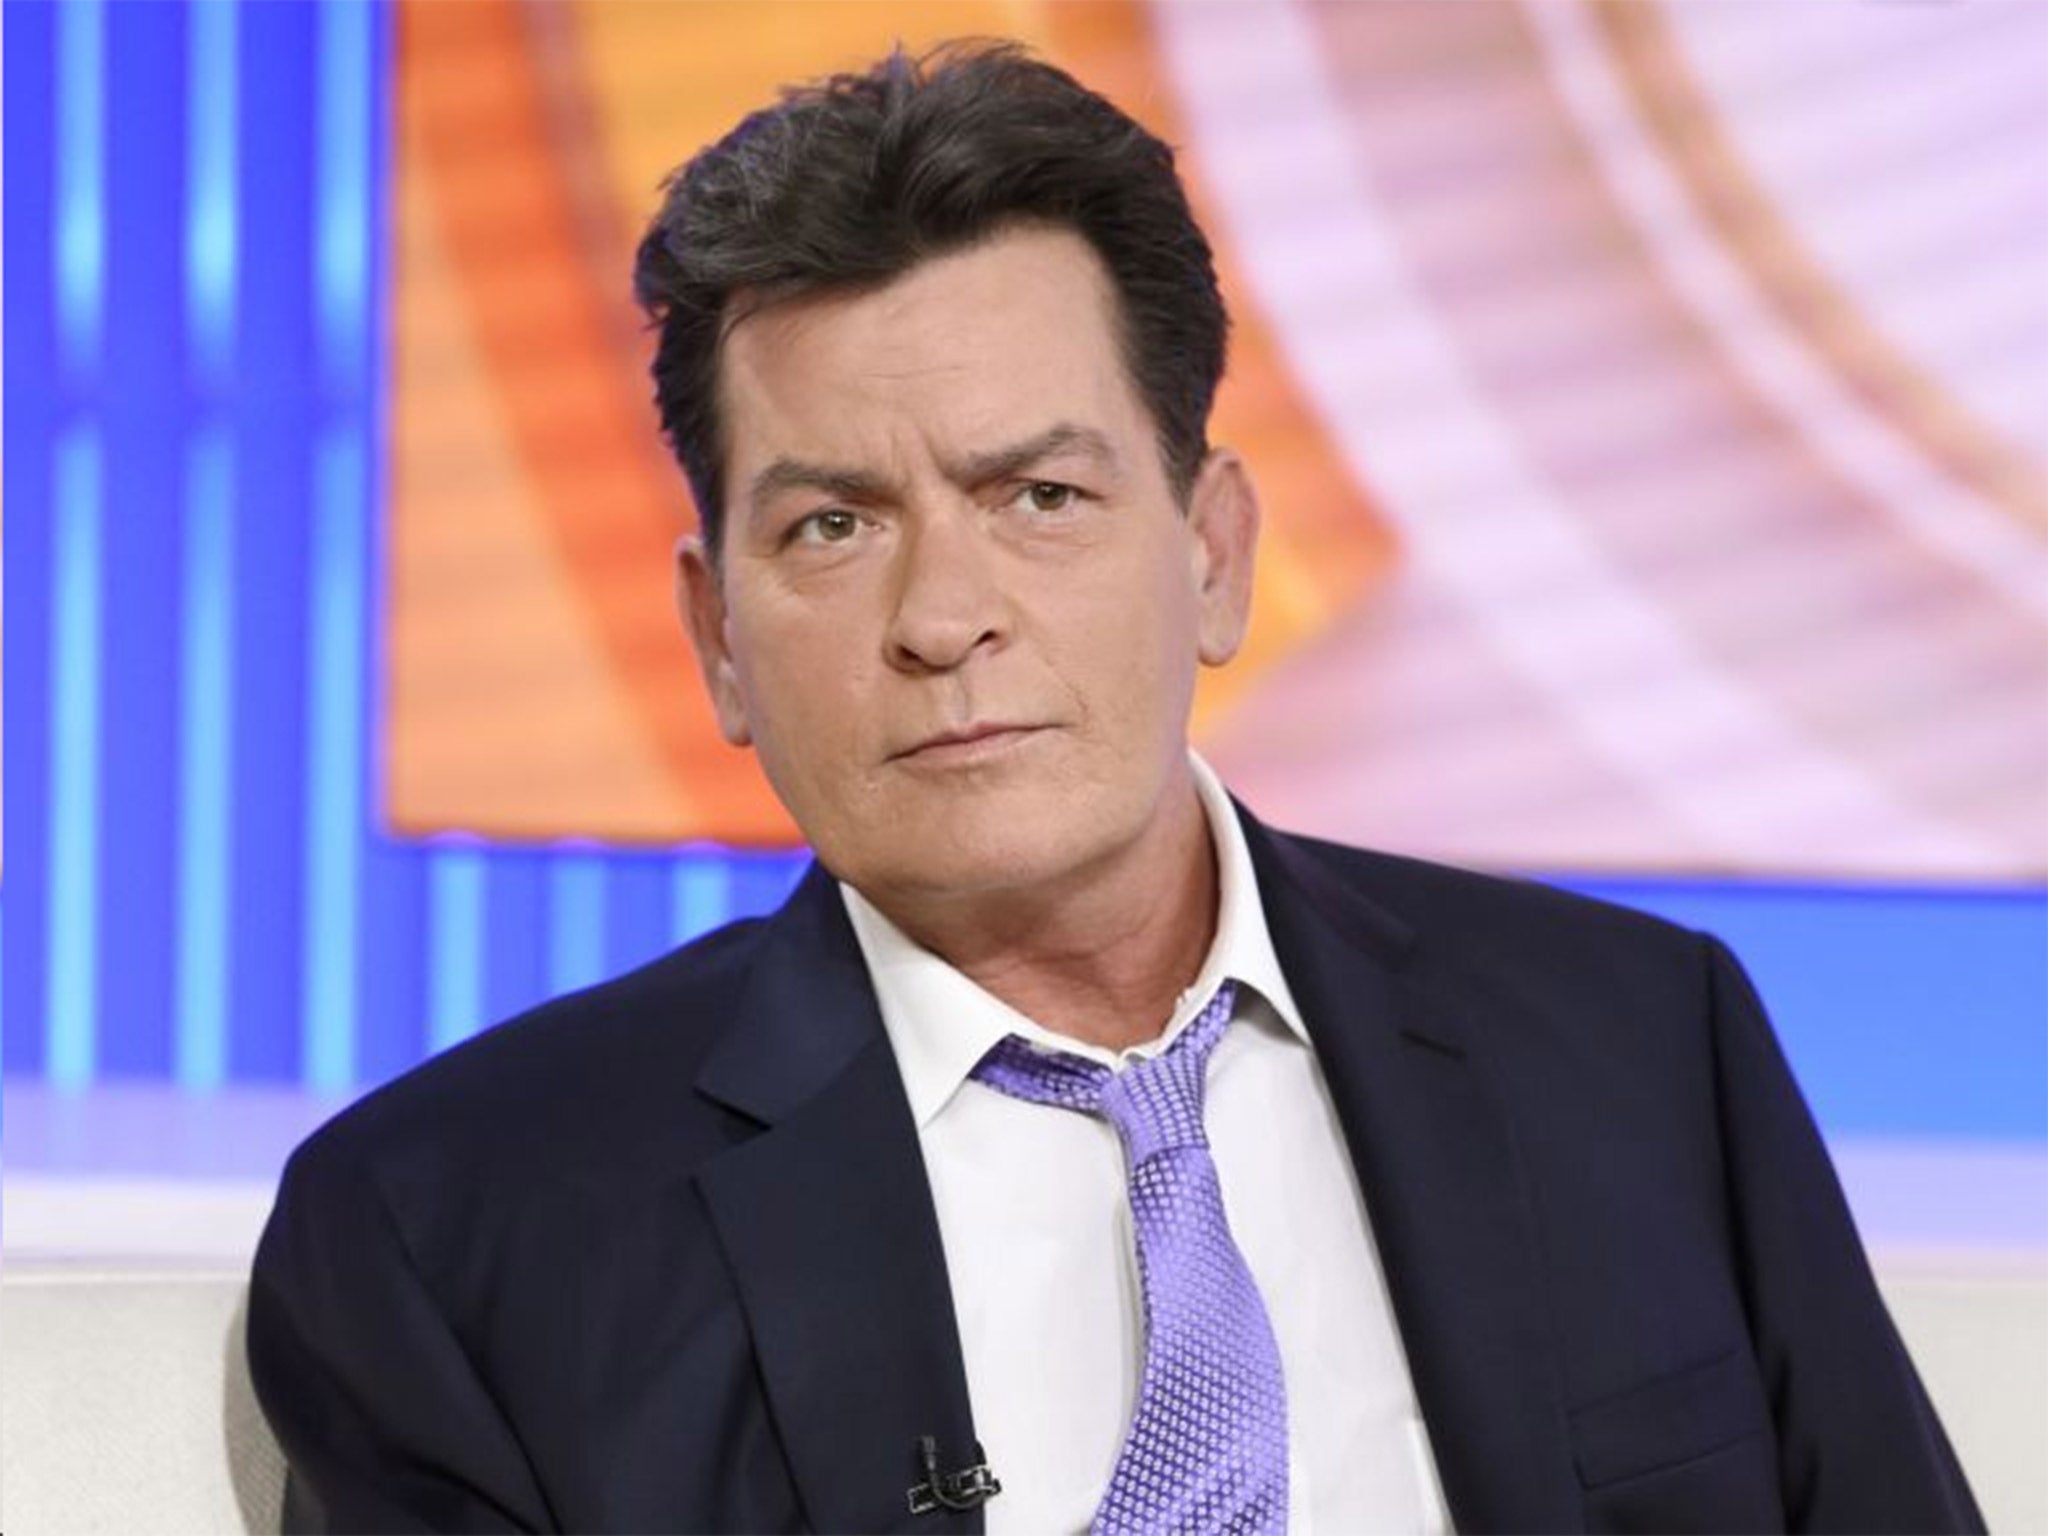 Charlie Sheen Porn stars demand list of actors sexual partners following HIV-positive status announcement The Independent The Independent